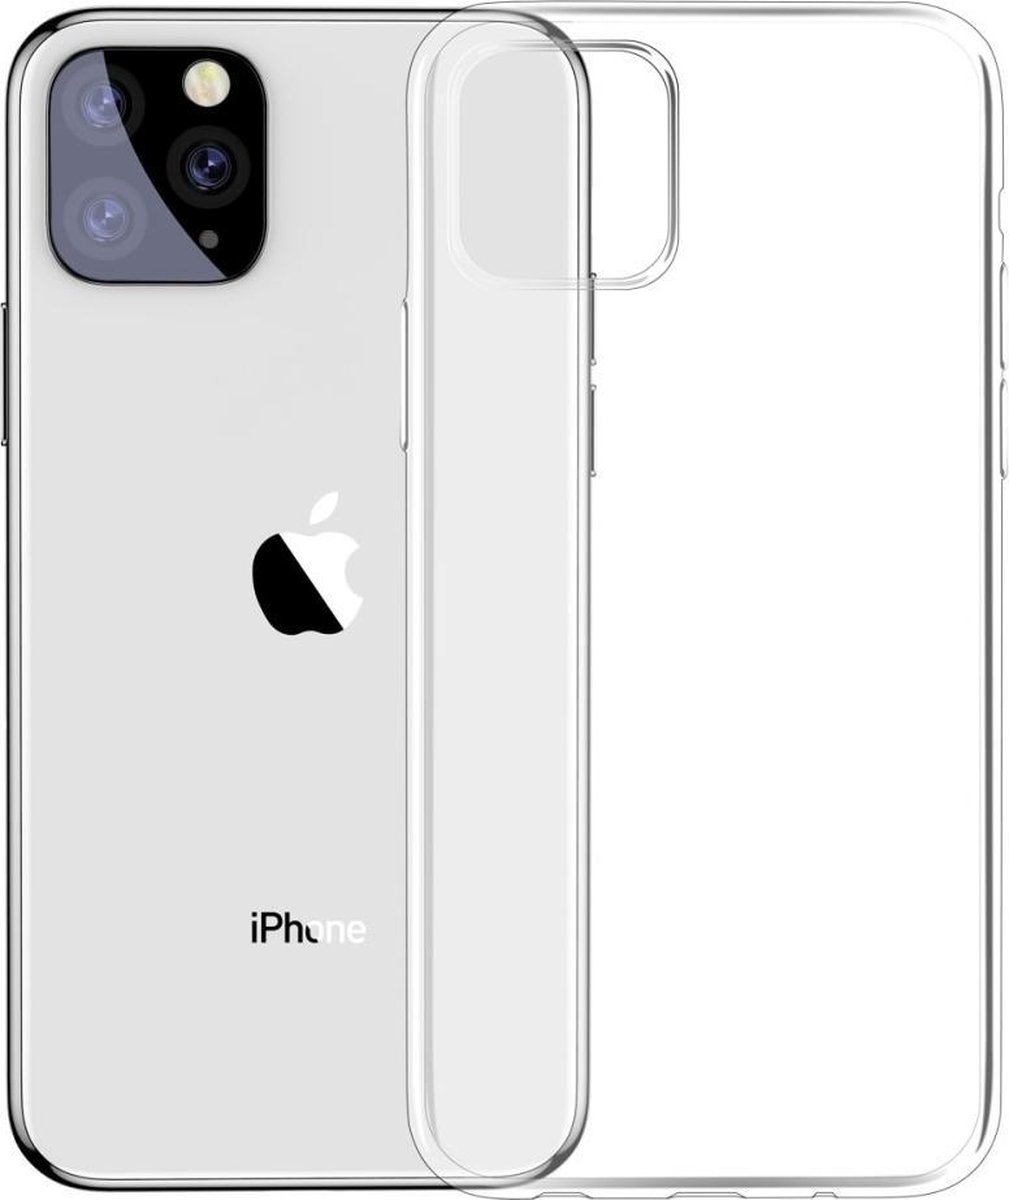 iPhone 11 Pro Max Hoesje - iPhone 11 Pro Max Case - iPhone 11 Pro Max Back Cover - Transparant - Doorzichtig - Siliconen